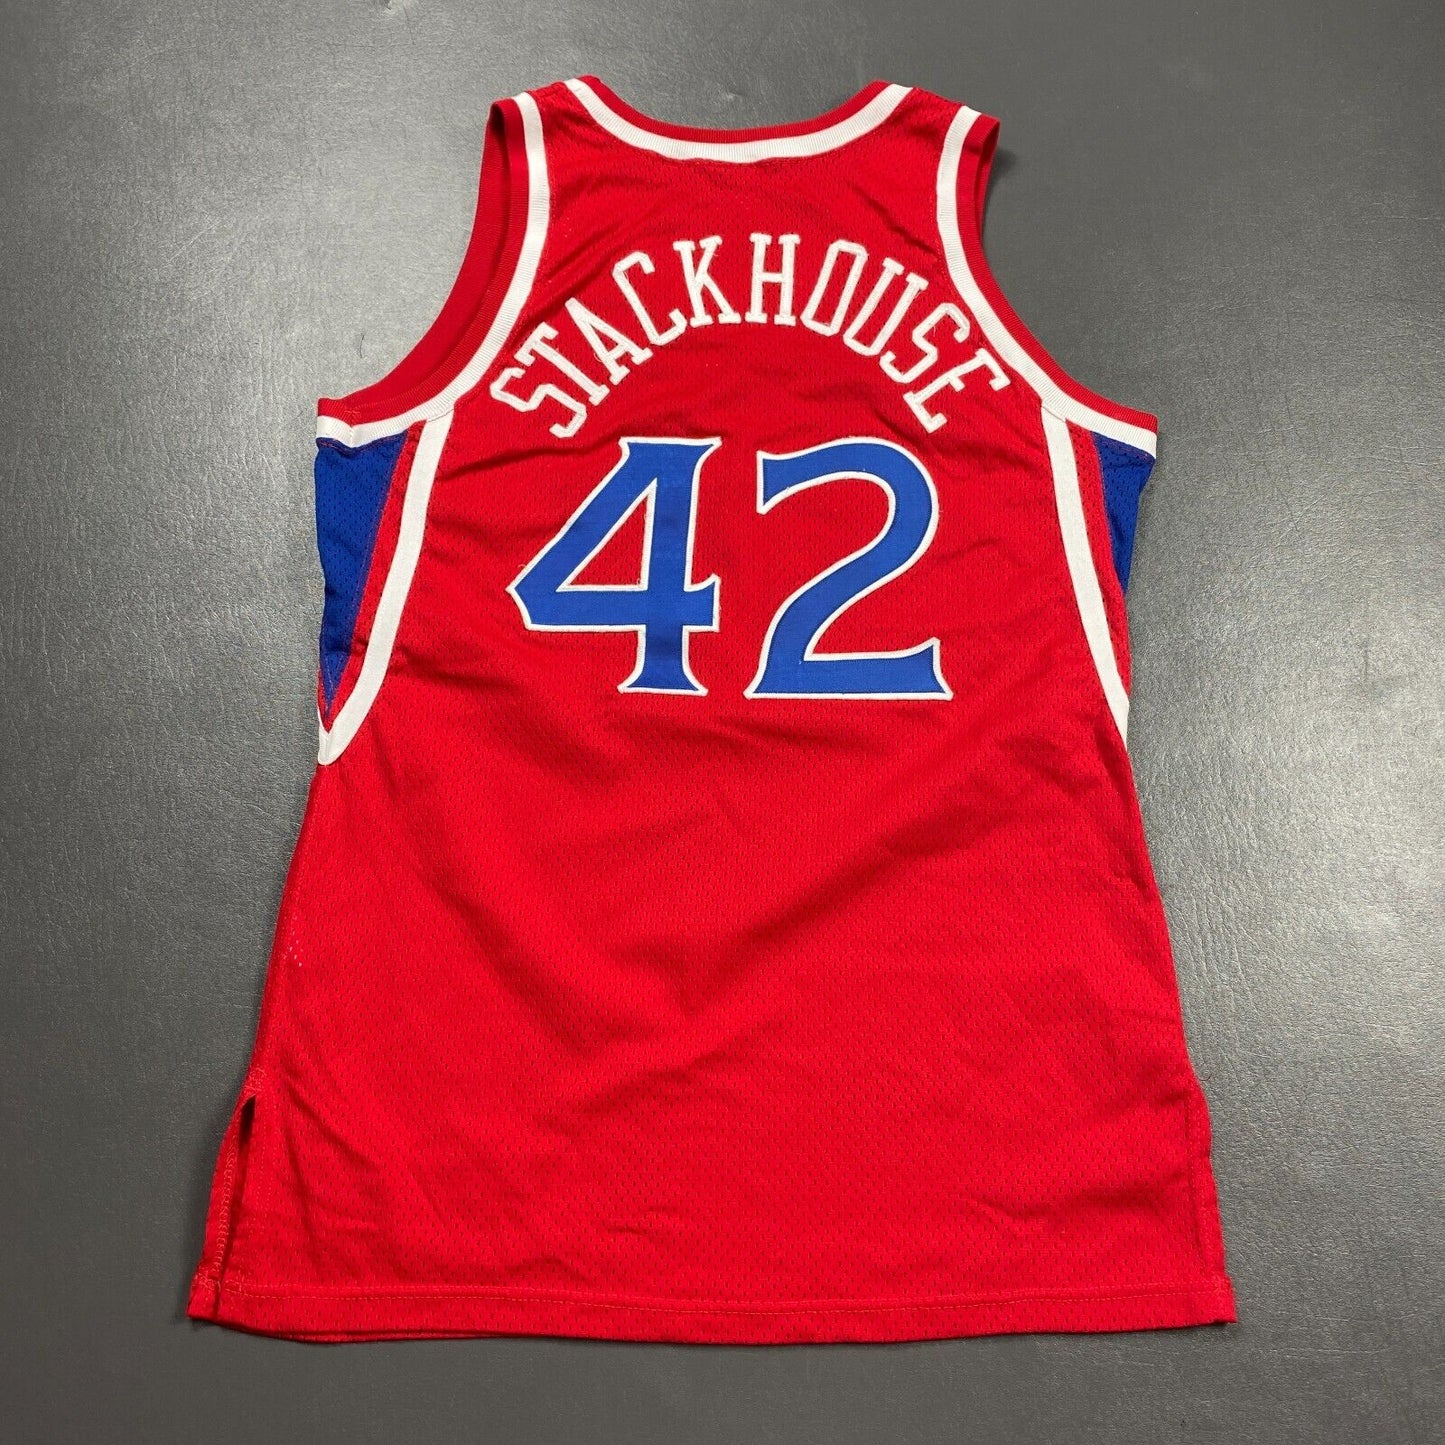 100% Authentic Jerry Stackhouse Vintage Champion 95 96 76ers Pro Cut Game Jersey